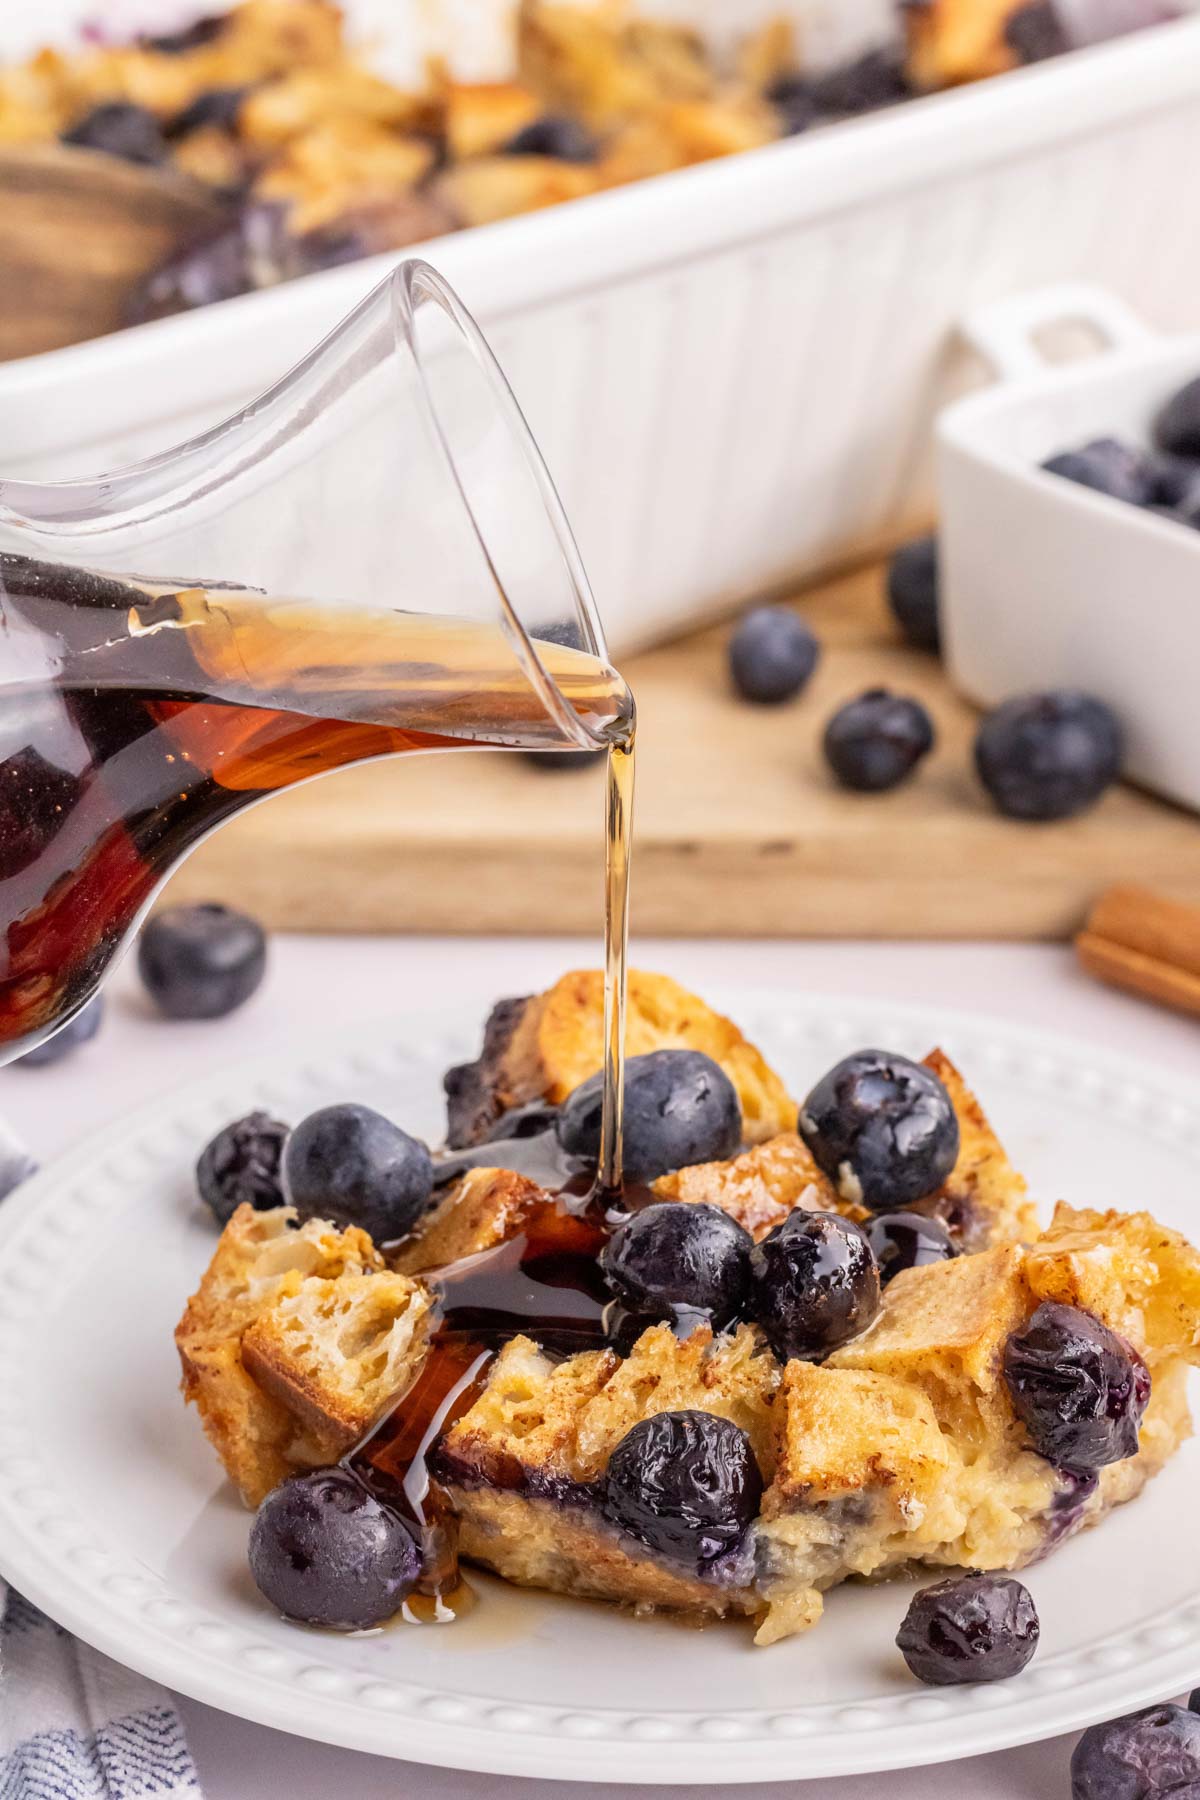 Syrup being poured over a plate of blueberry french toast casserole.